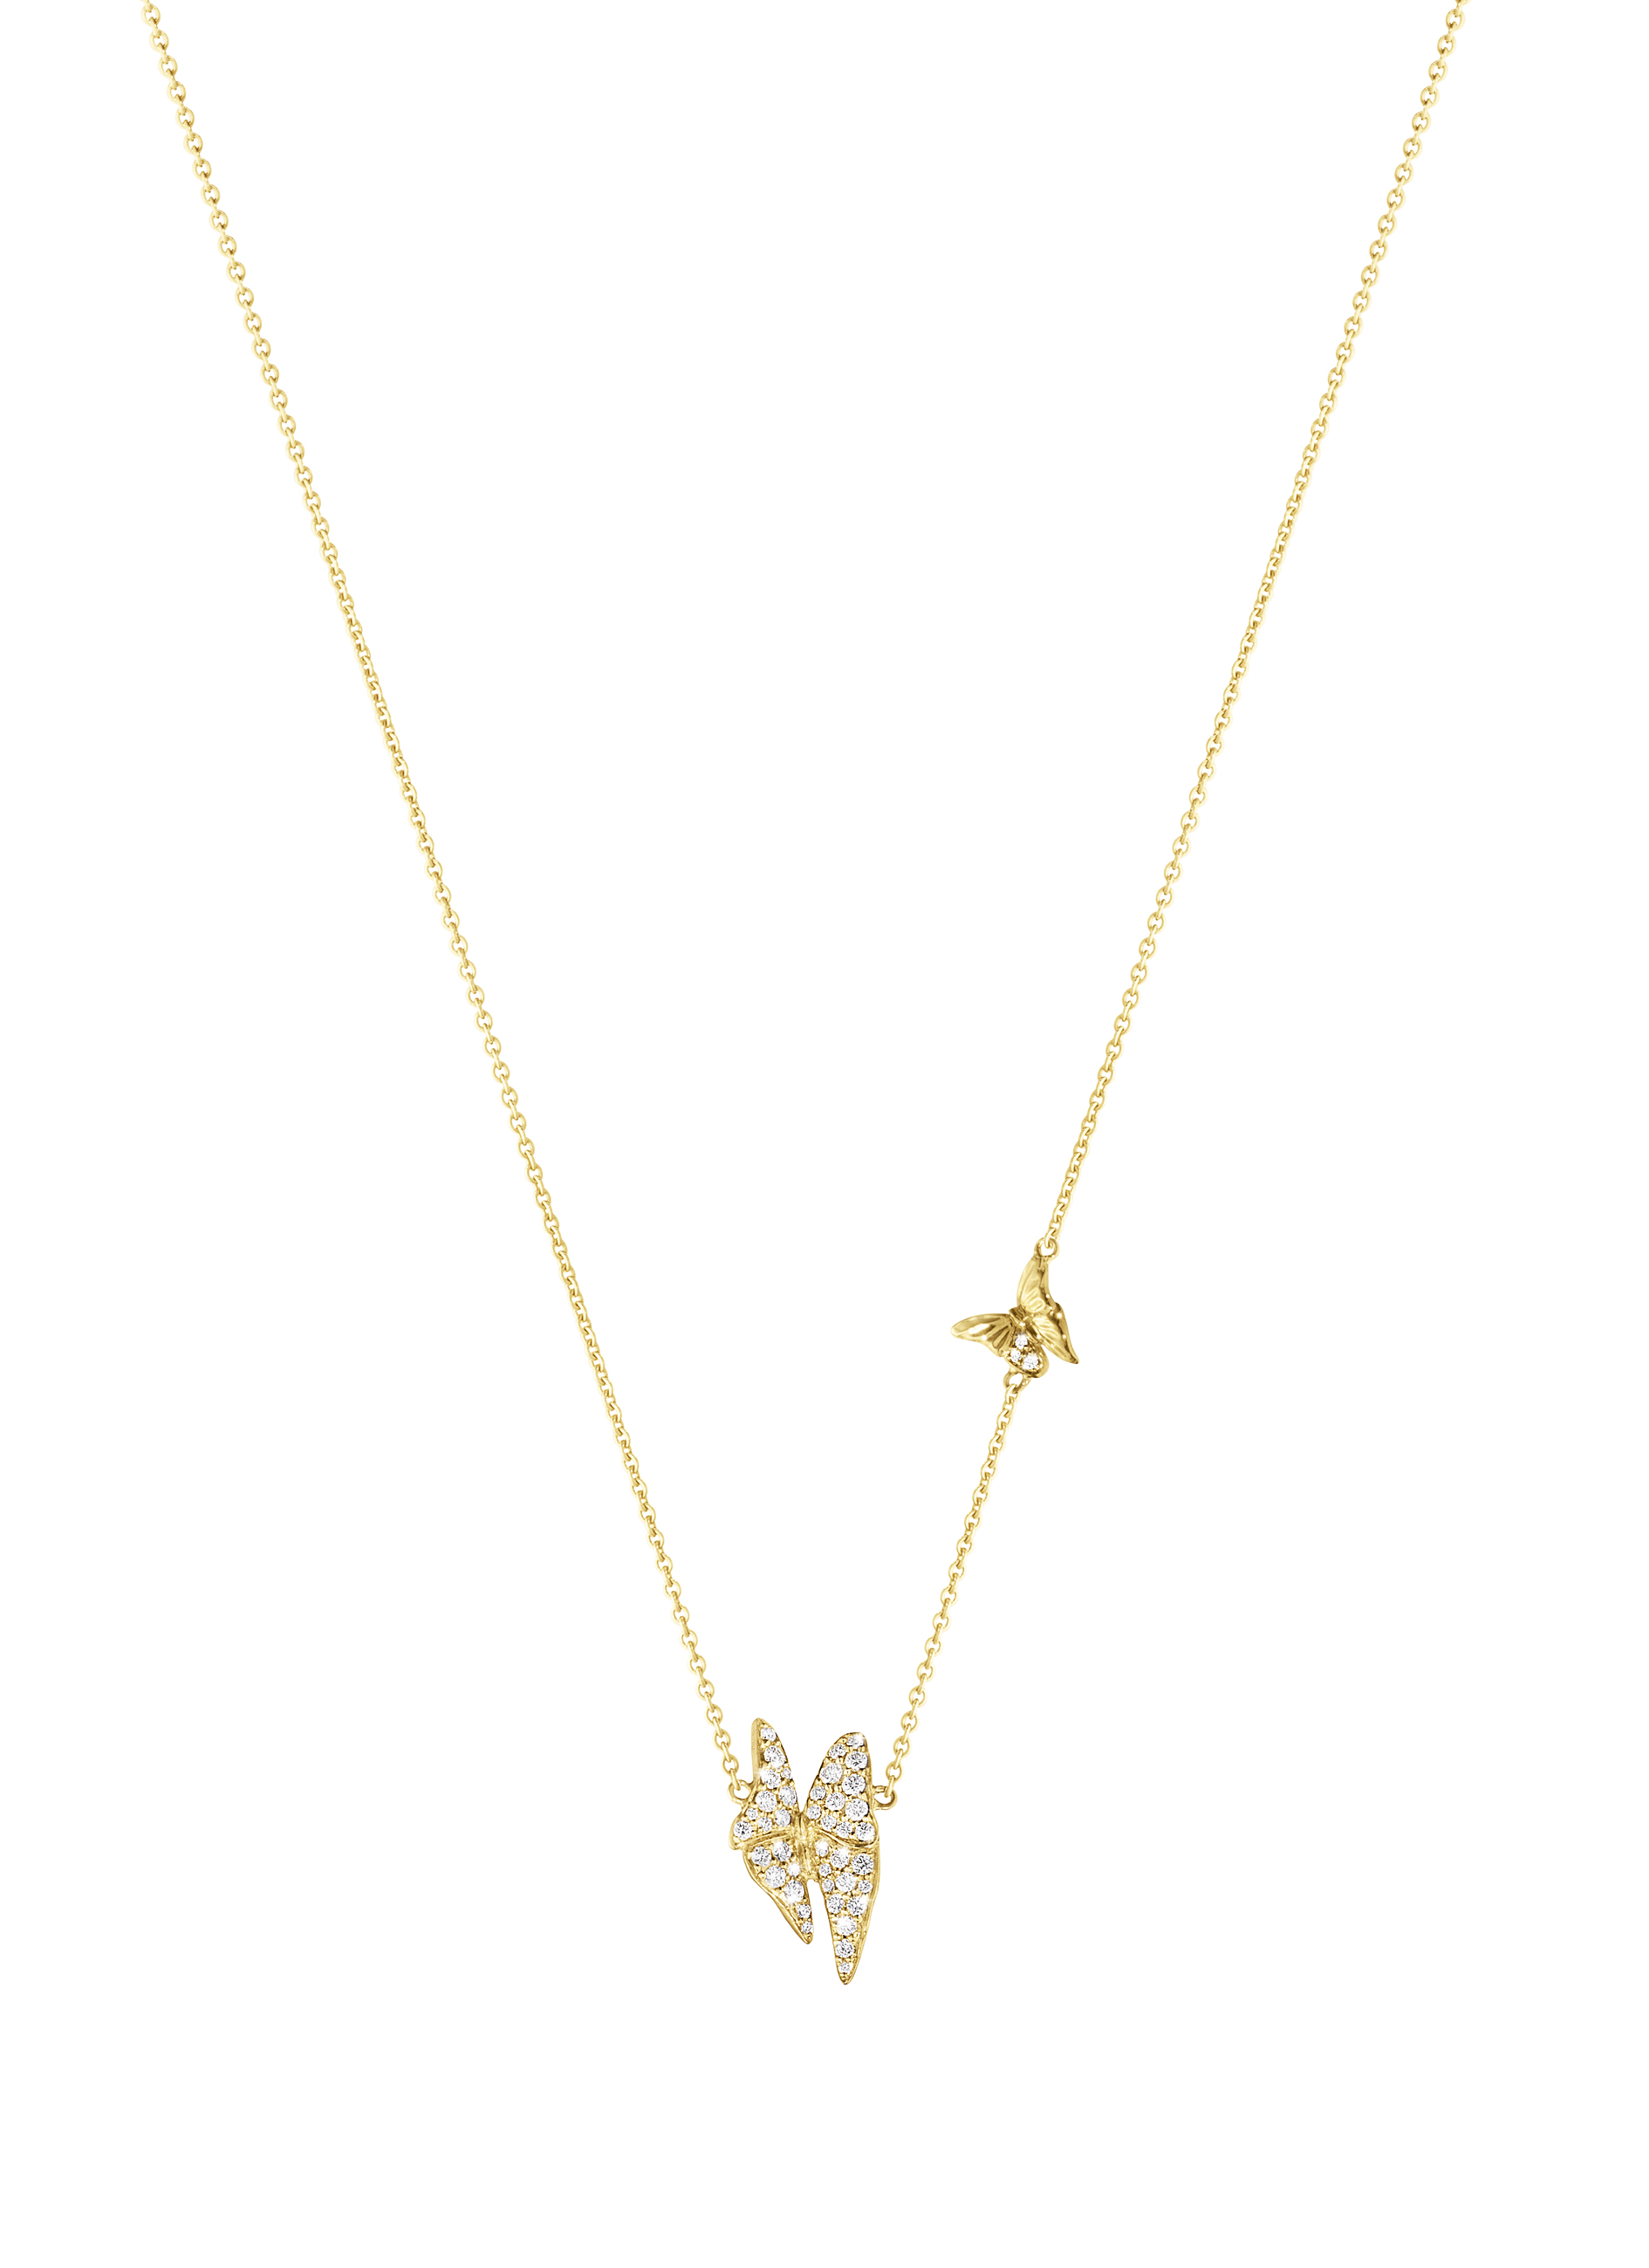   The Askill Collection for Georg Jensen  Butterfly necklace in 18K gold and diamonds. 